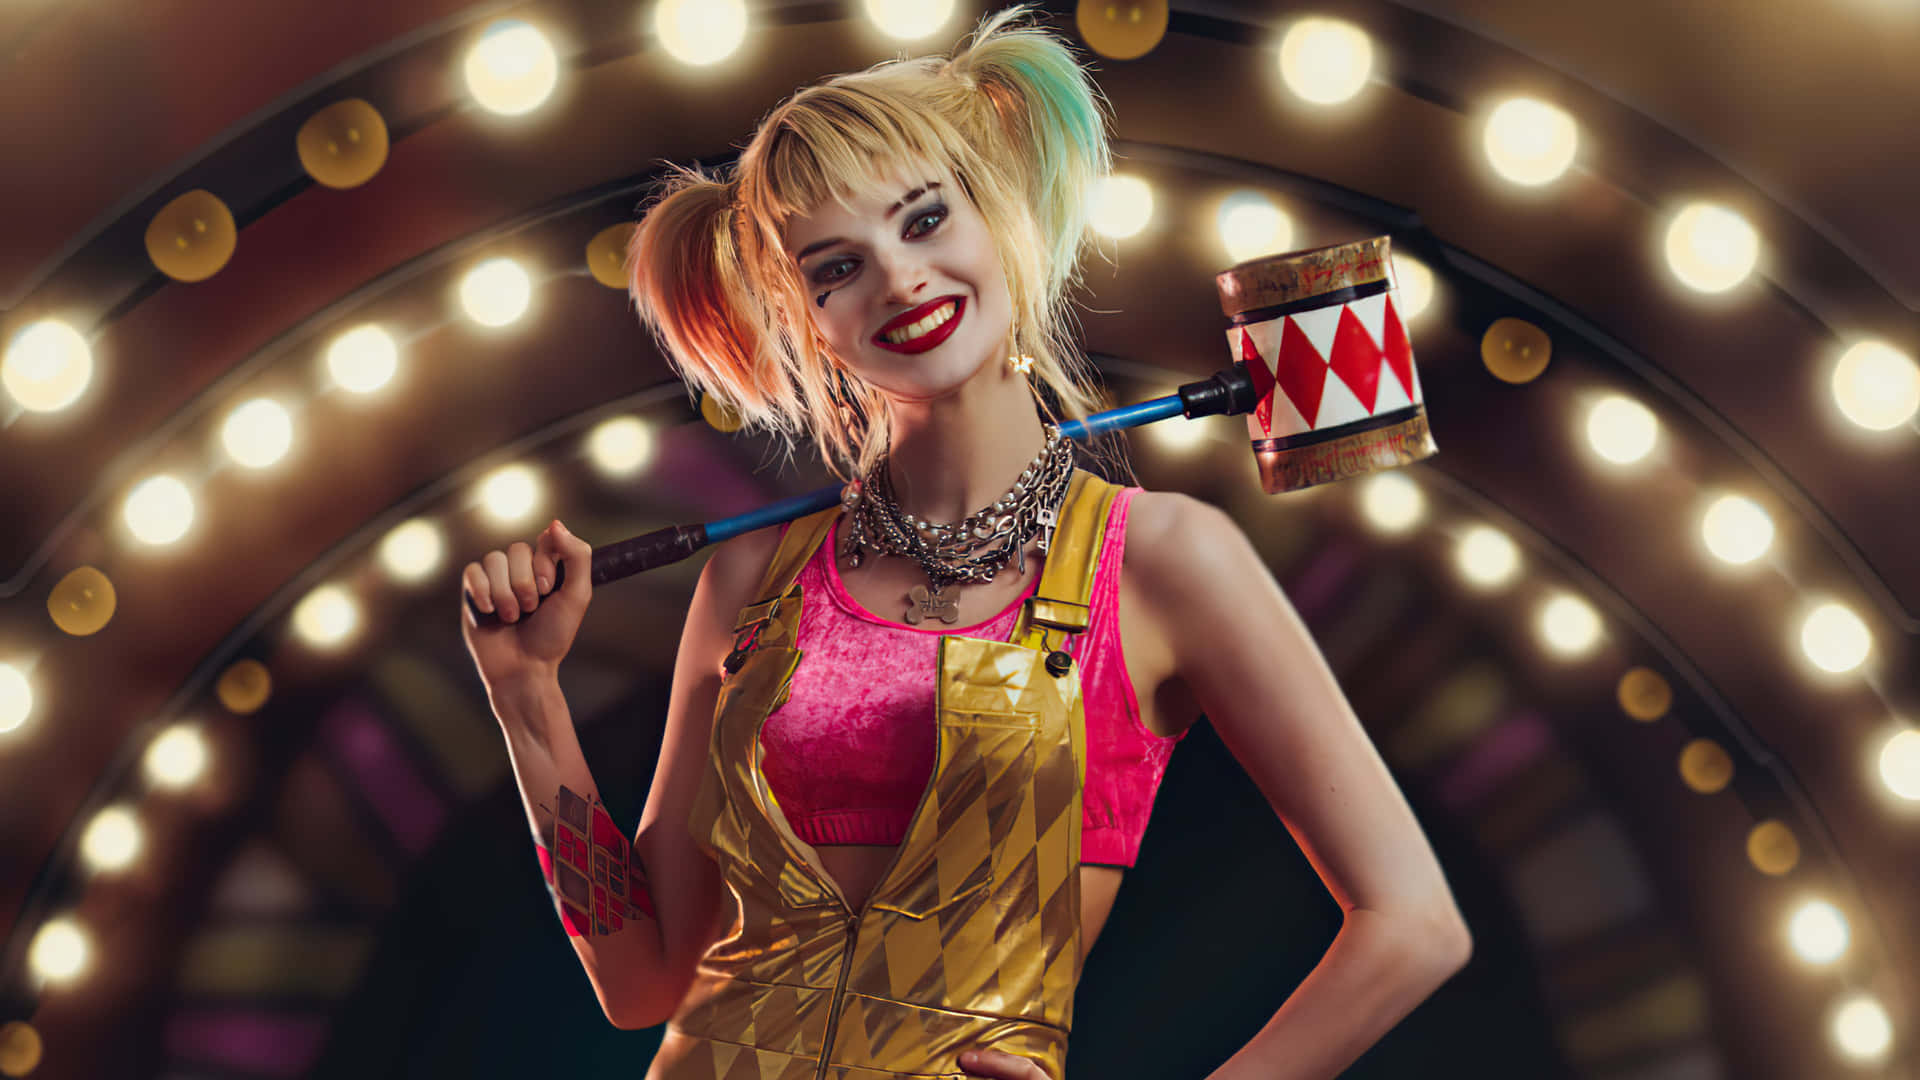 Harley Quinn wielding her iconic hammer in a stunning high-quality wallpaper Wallpaper